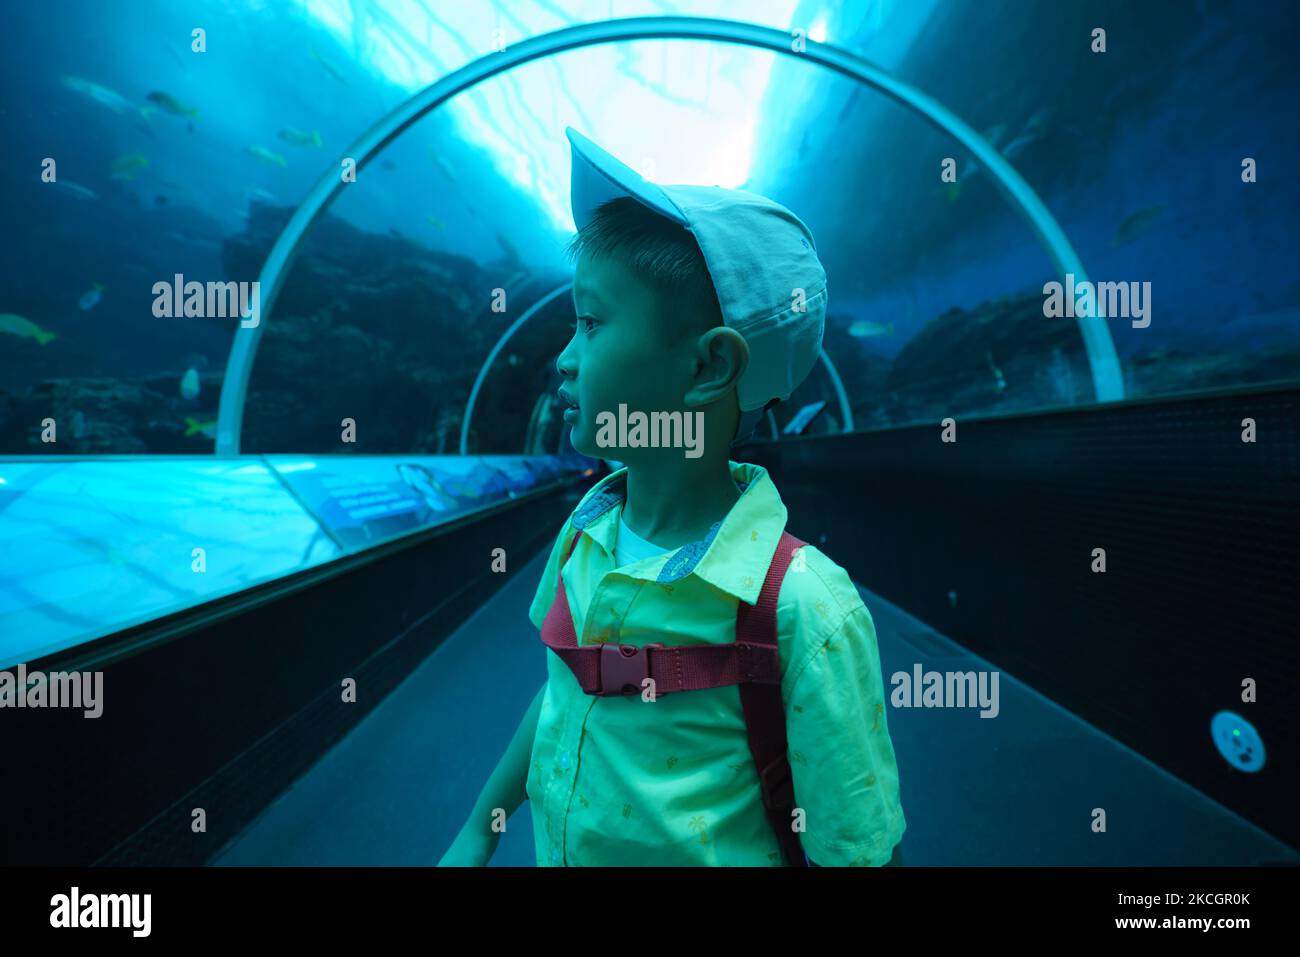 Asian young child standing in underwater tunnel at the aquarium. Kids looking excited and fun to see fish. Stock Photo